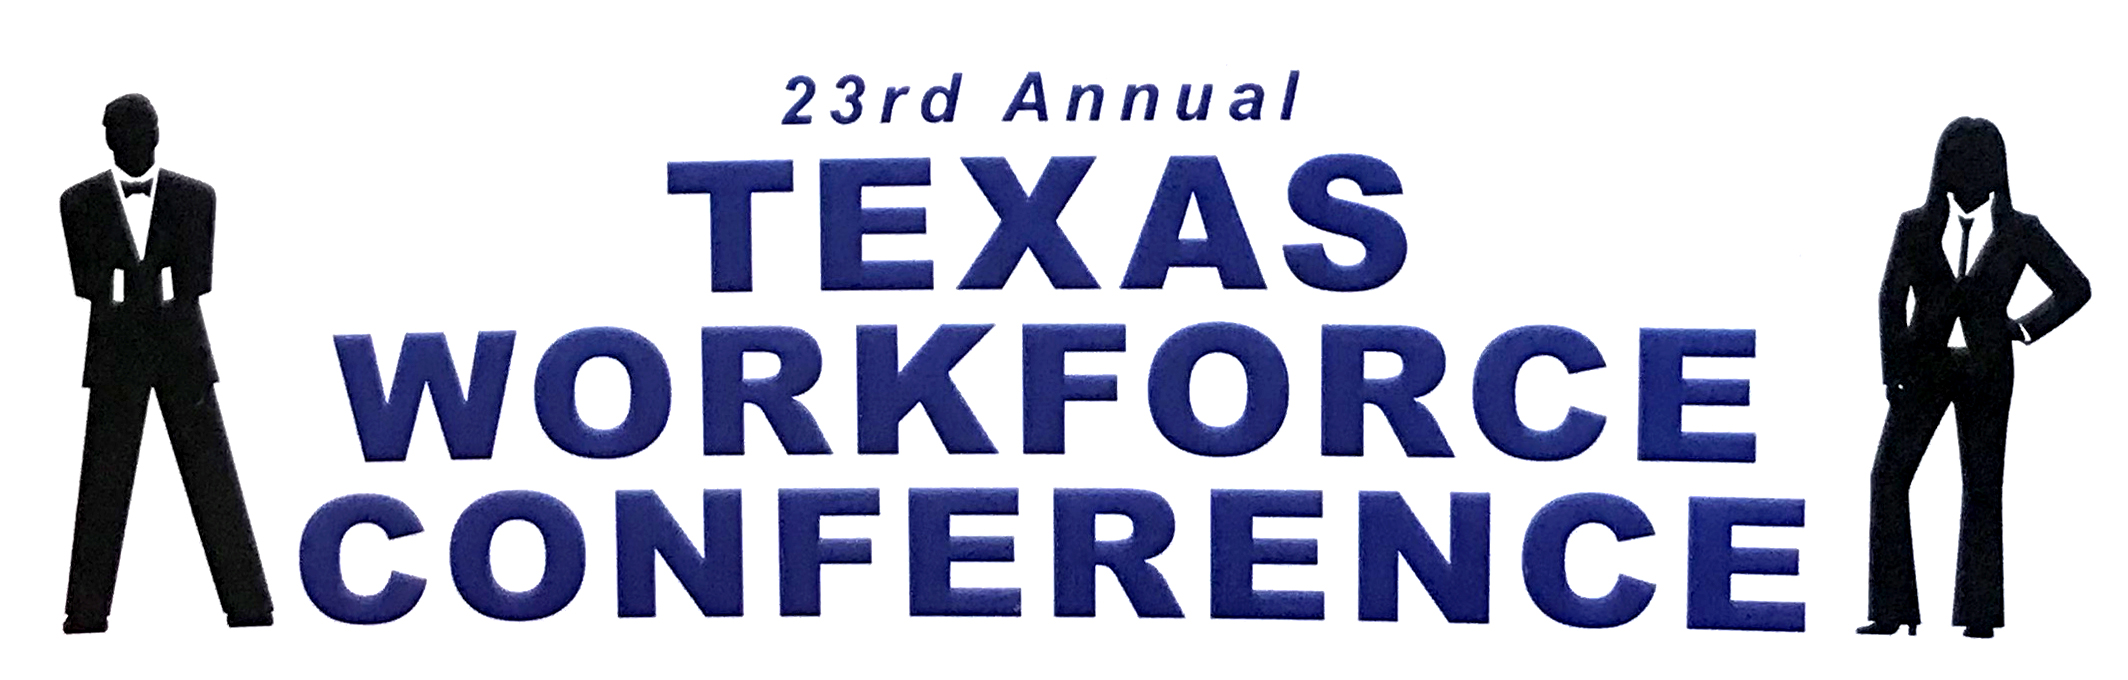 23rd Annual Texas Workforce Conference